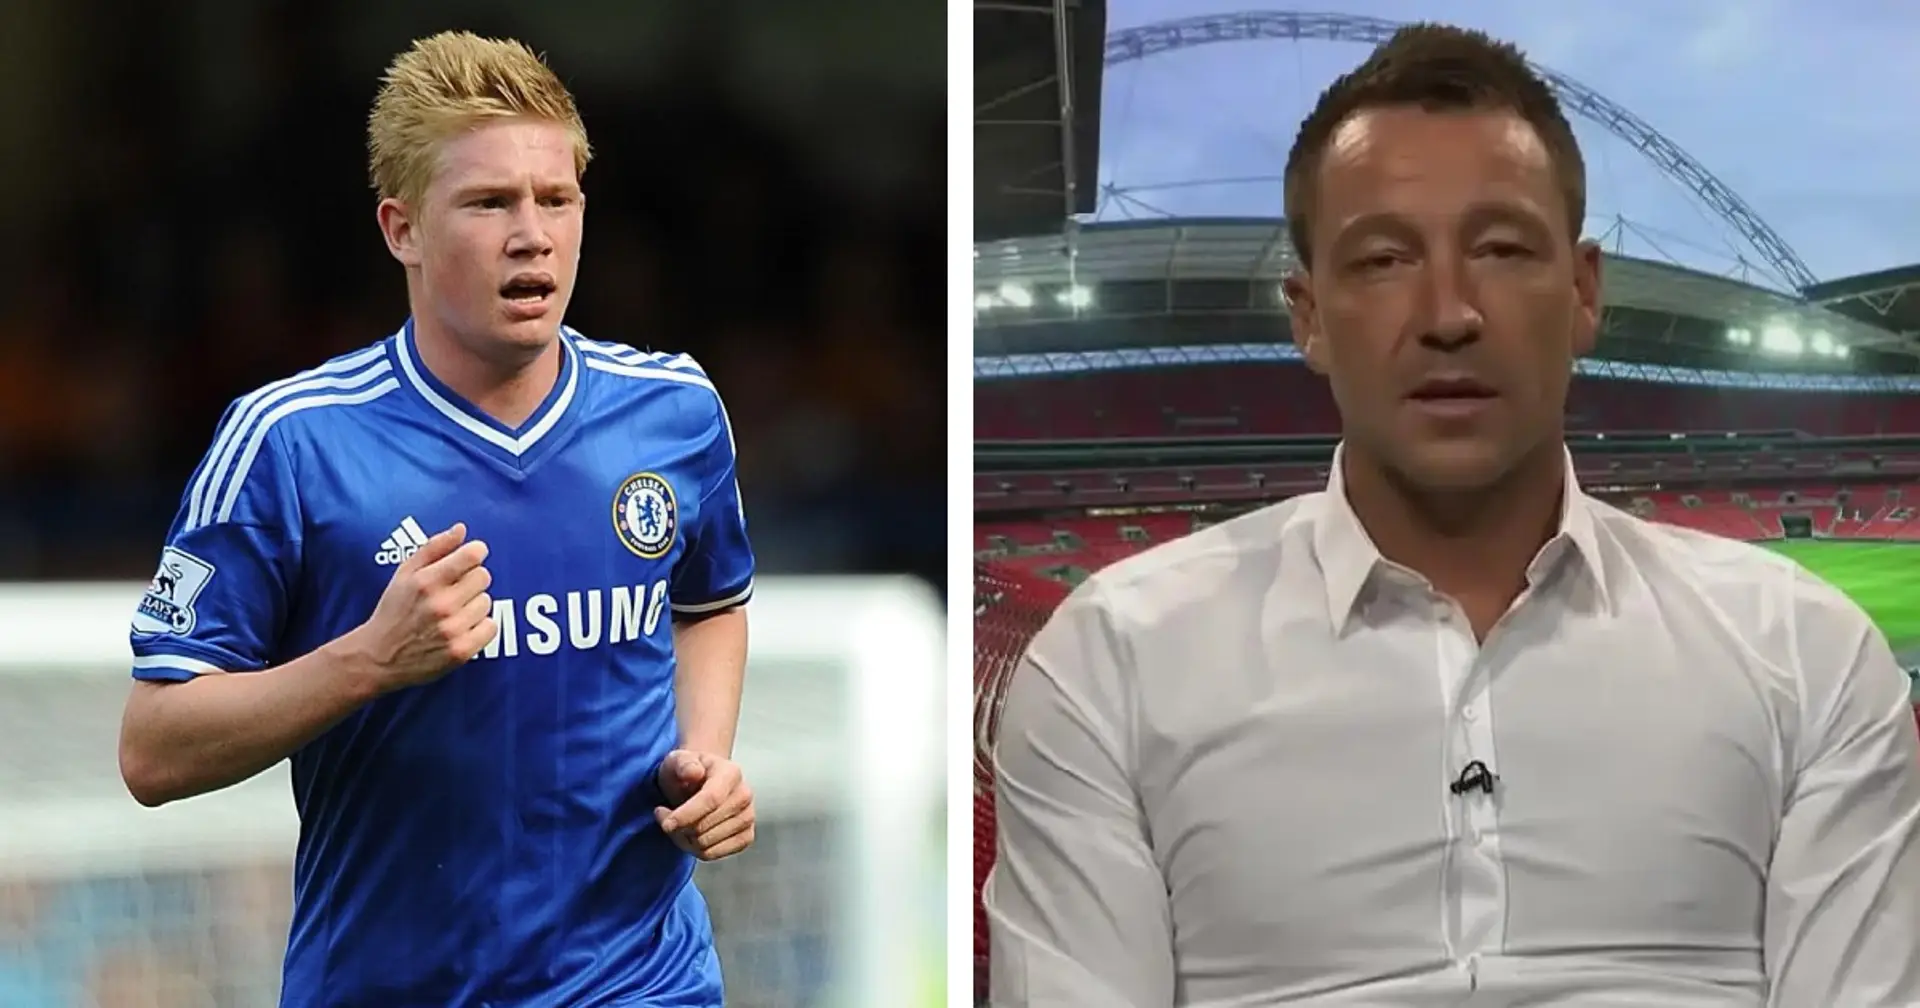 'I’m disappointed in myself as captain, that’s a regret I have': Terry makes Salah, De Bruyne admission